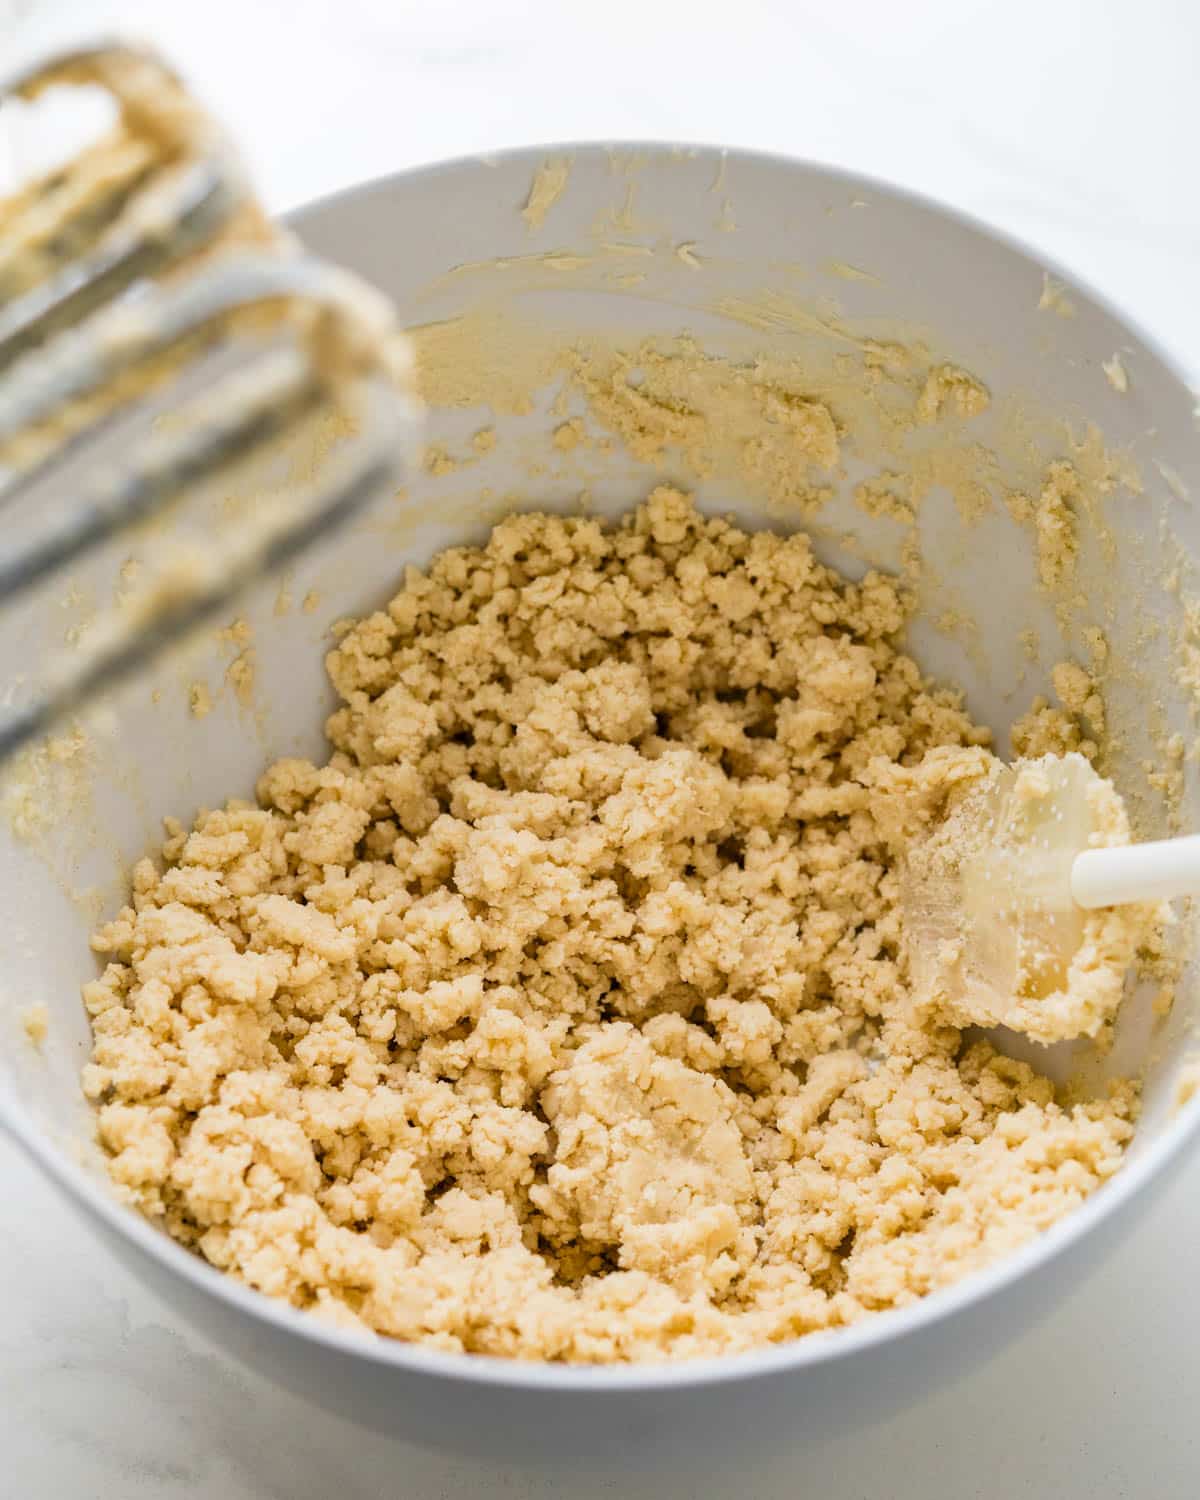 Beating the cookie dough until it's blended.